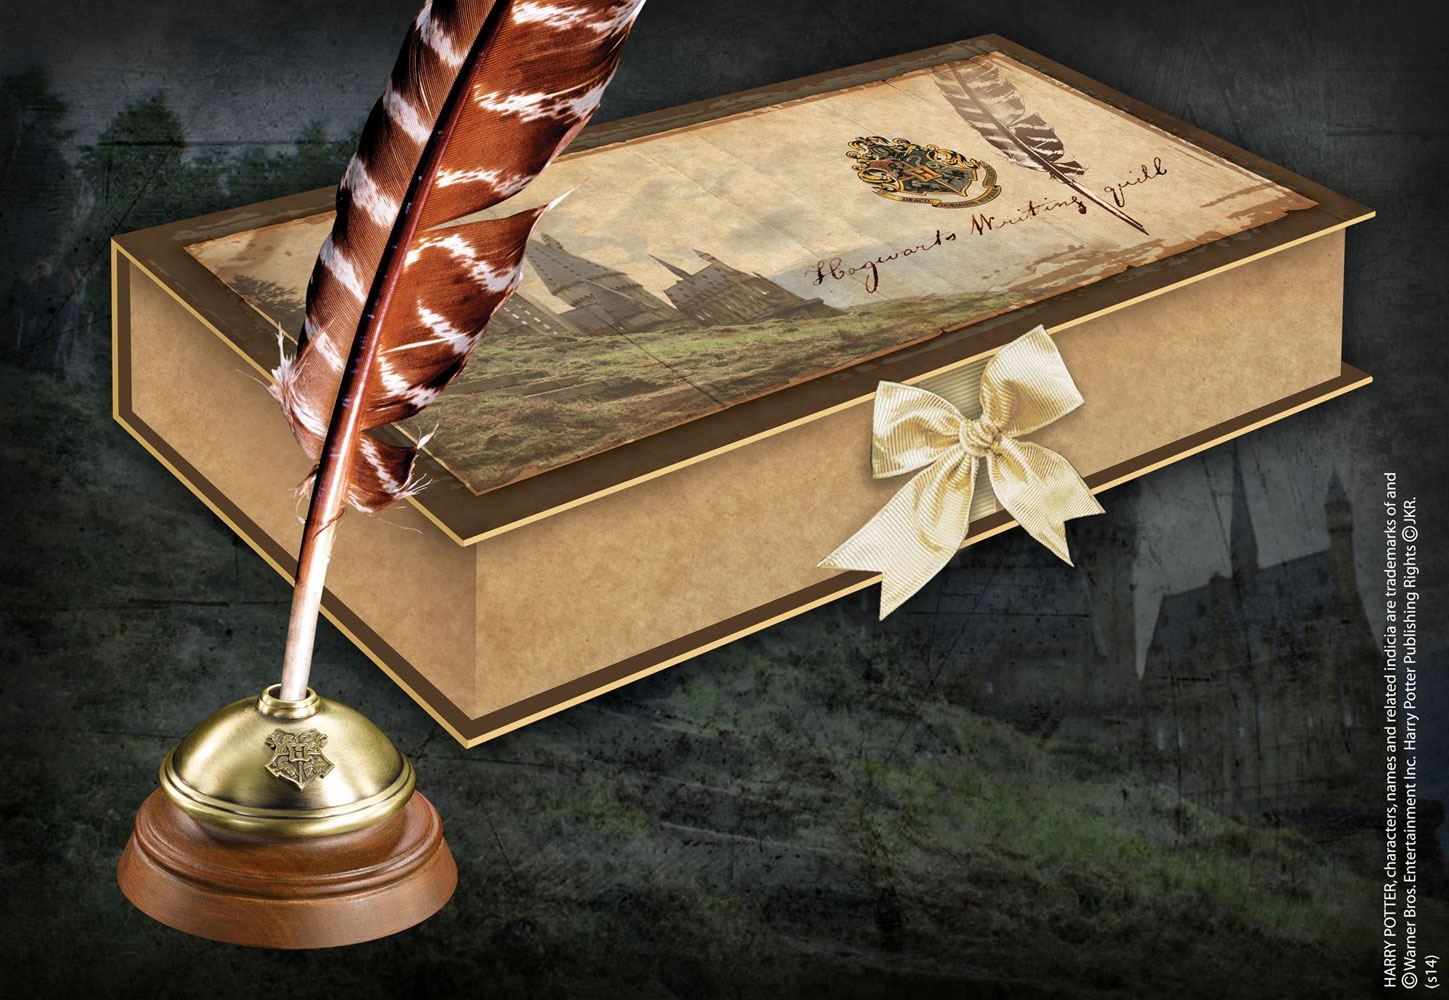 Harry Potter Replica Hogwarts Writing Quill 0812370010912